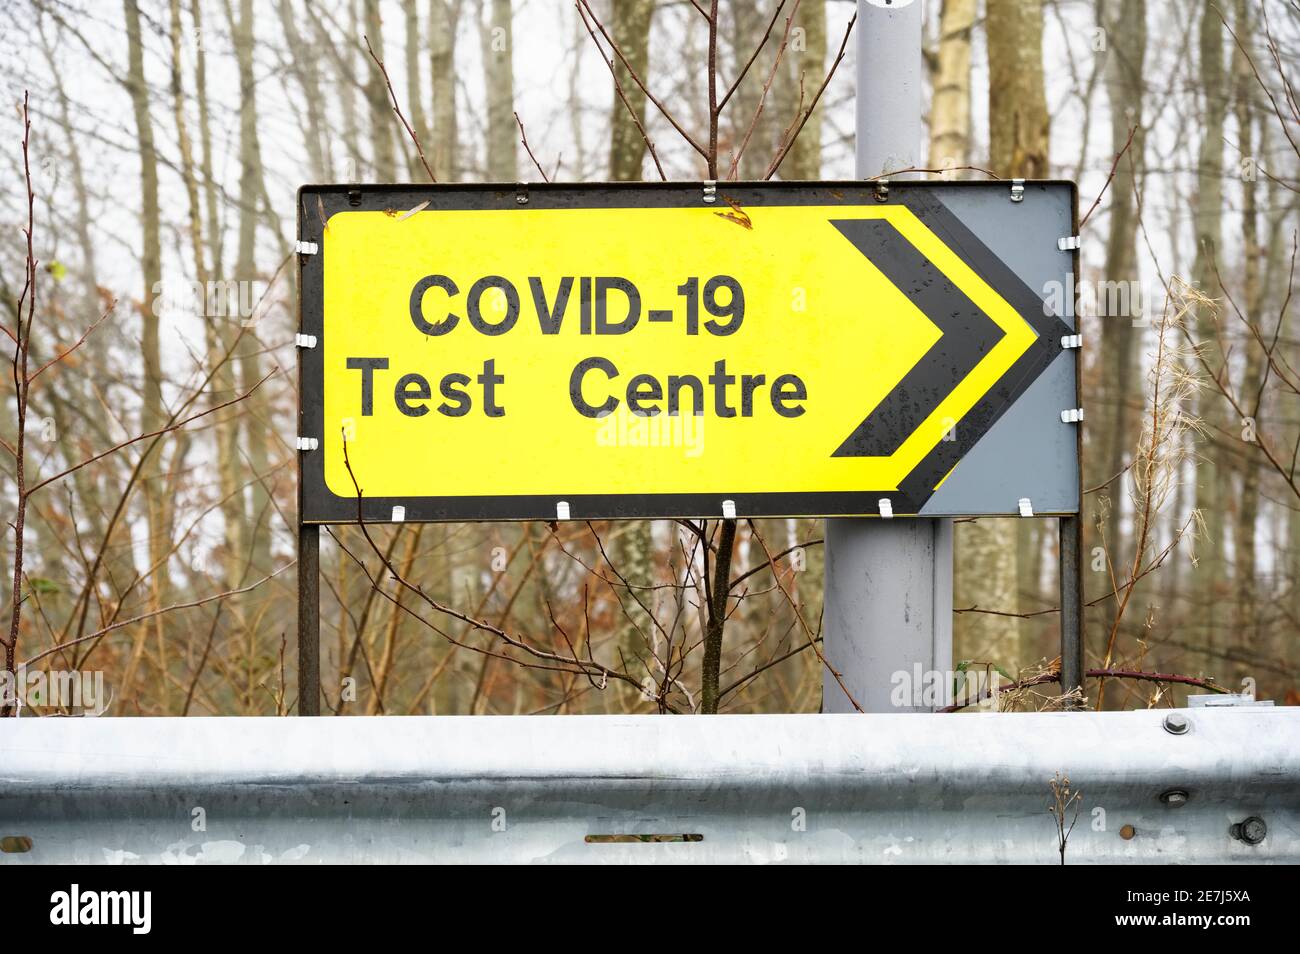 Covid-19 test centre sign at road with traffic cones Stock Photo